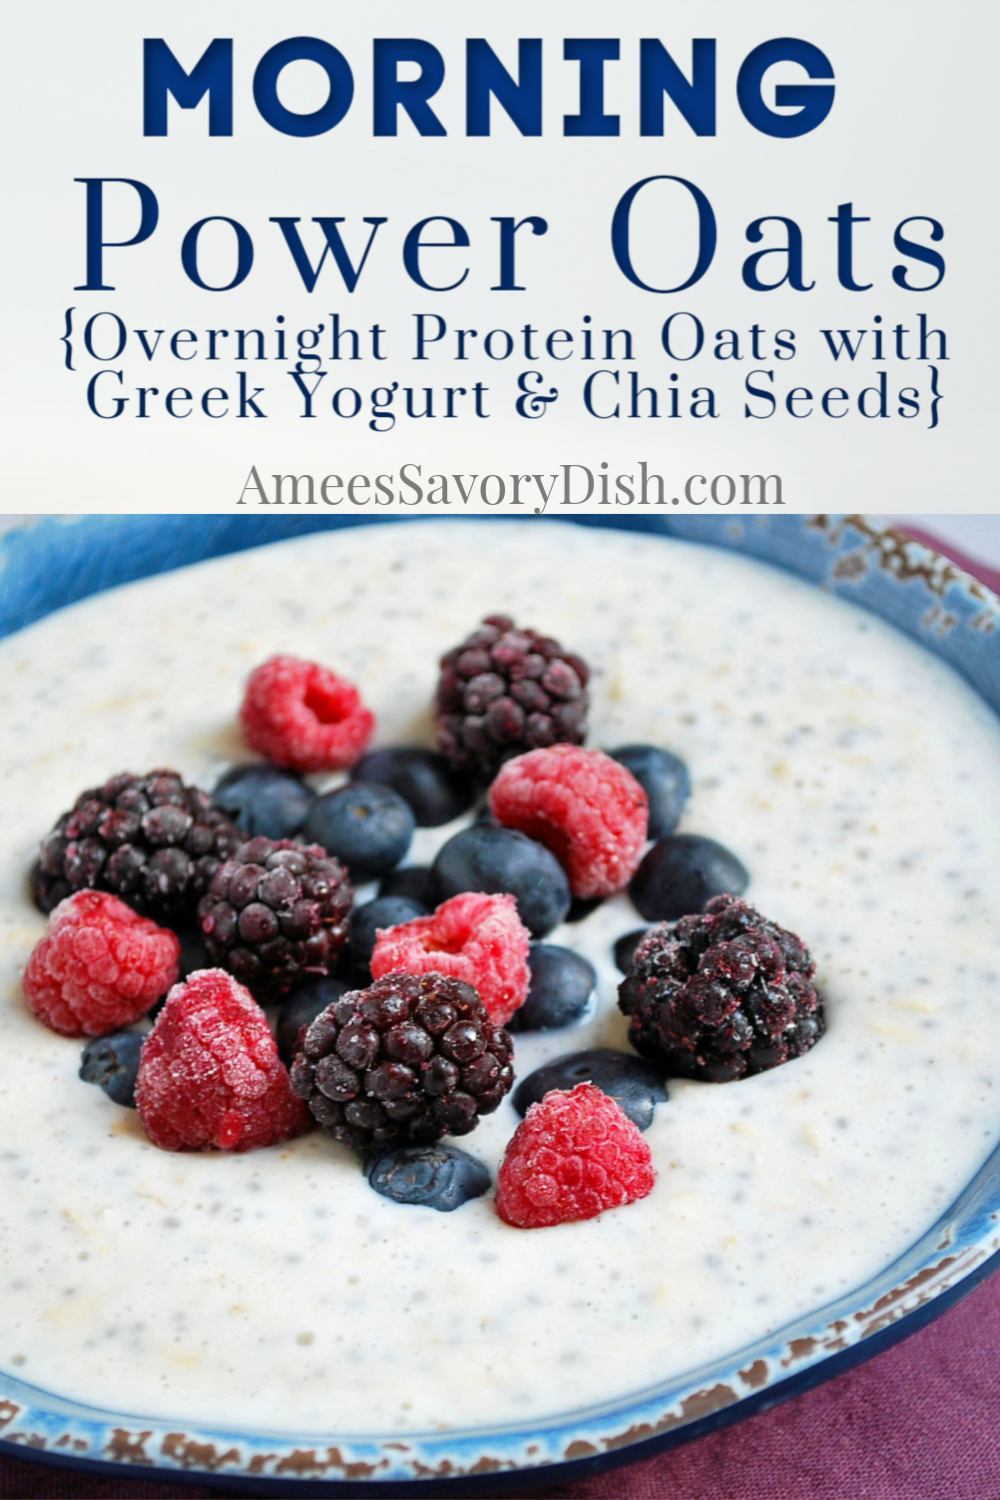 This Overnight Protein Oatmeal made with Greek yogurt is the perfect breakfast solution when there is no time for breakfast prep in the morning. This protein-packed power porridge recipe will keep you running until lunchtime! #overnightoats #proteinoatmeal #proteinporridge #proteinoats #overnightoatmeal #oatmeal via @Ameessavorydish